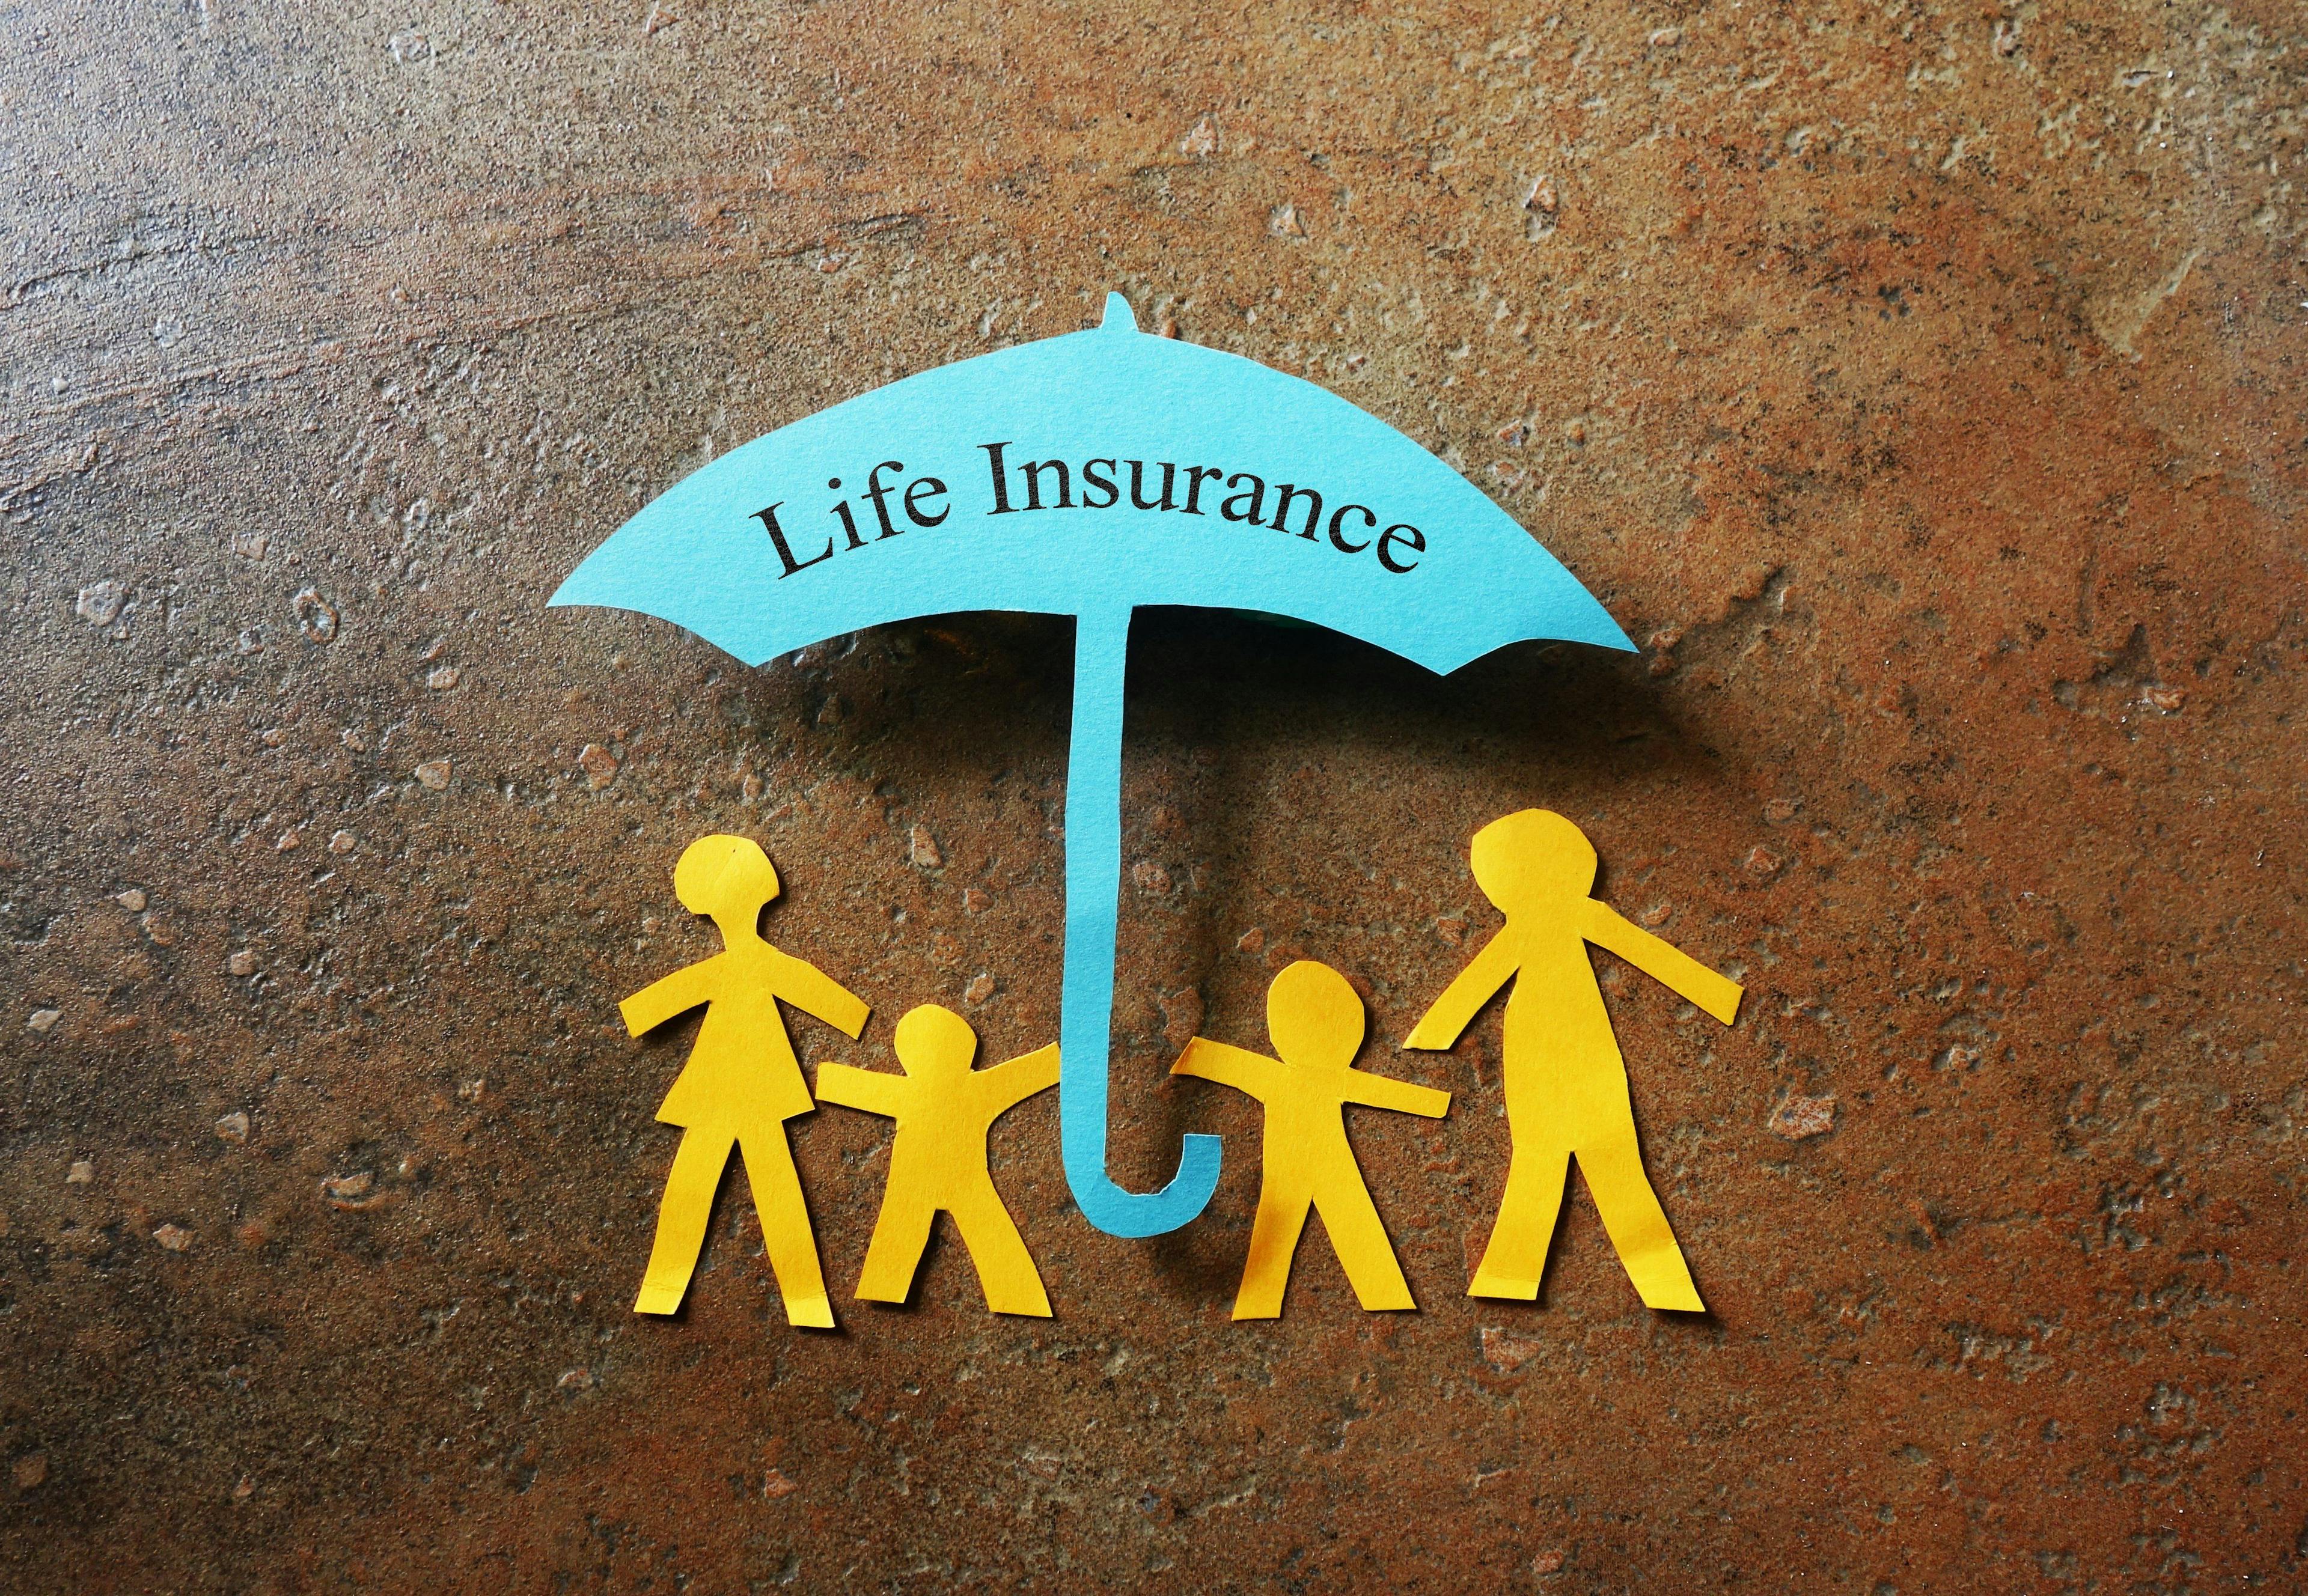 How much life insurance should you have?